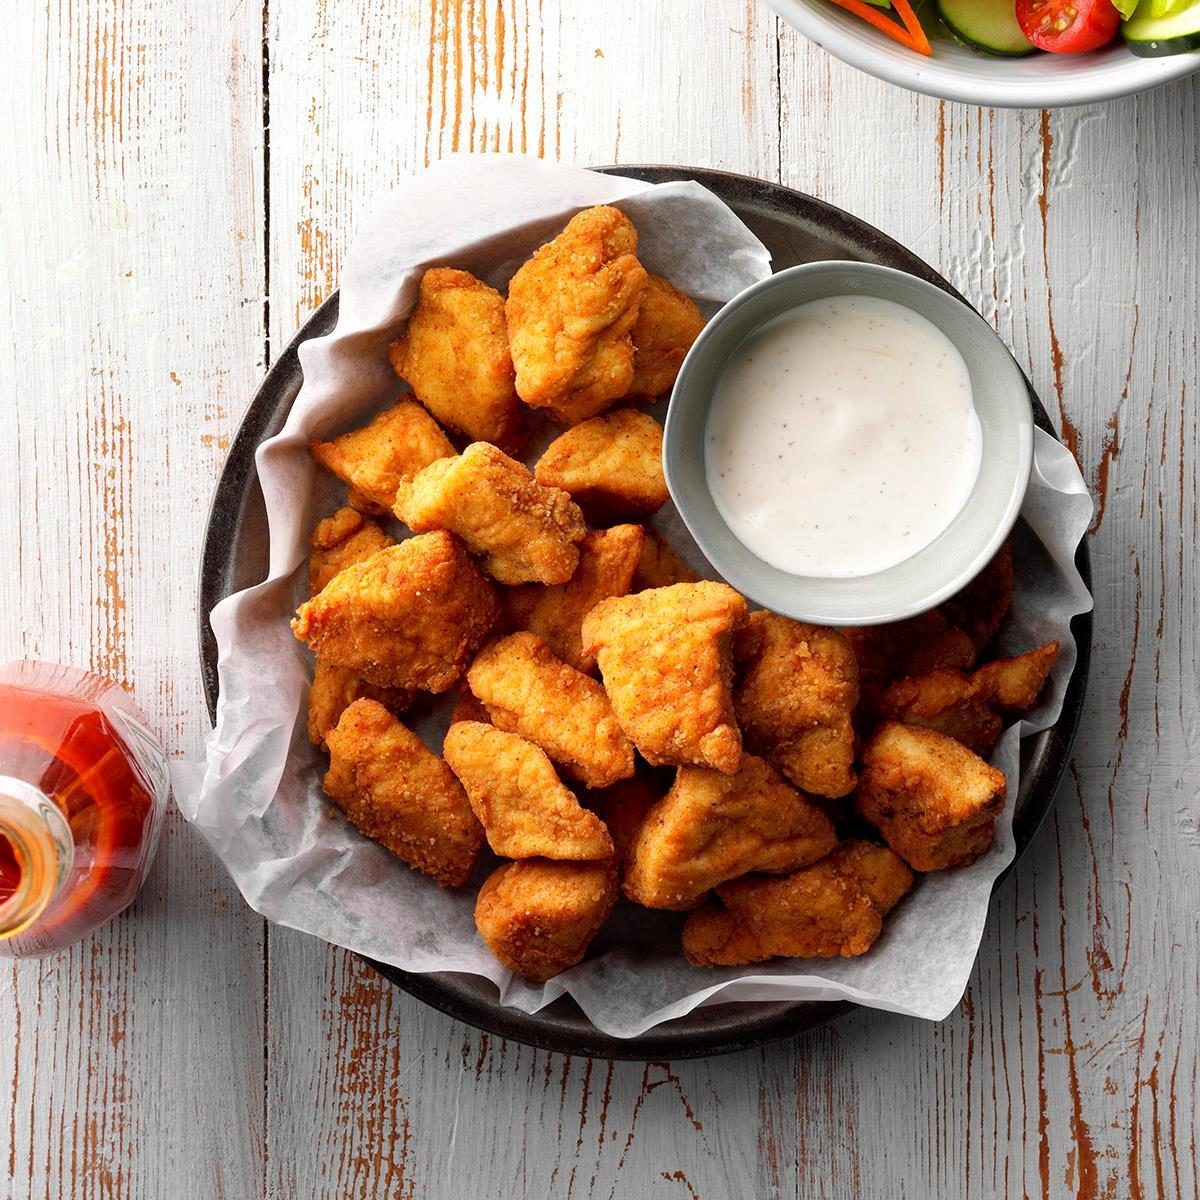 Chicken Nuggets Recipe: How to Make It | Taste of Home